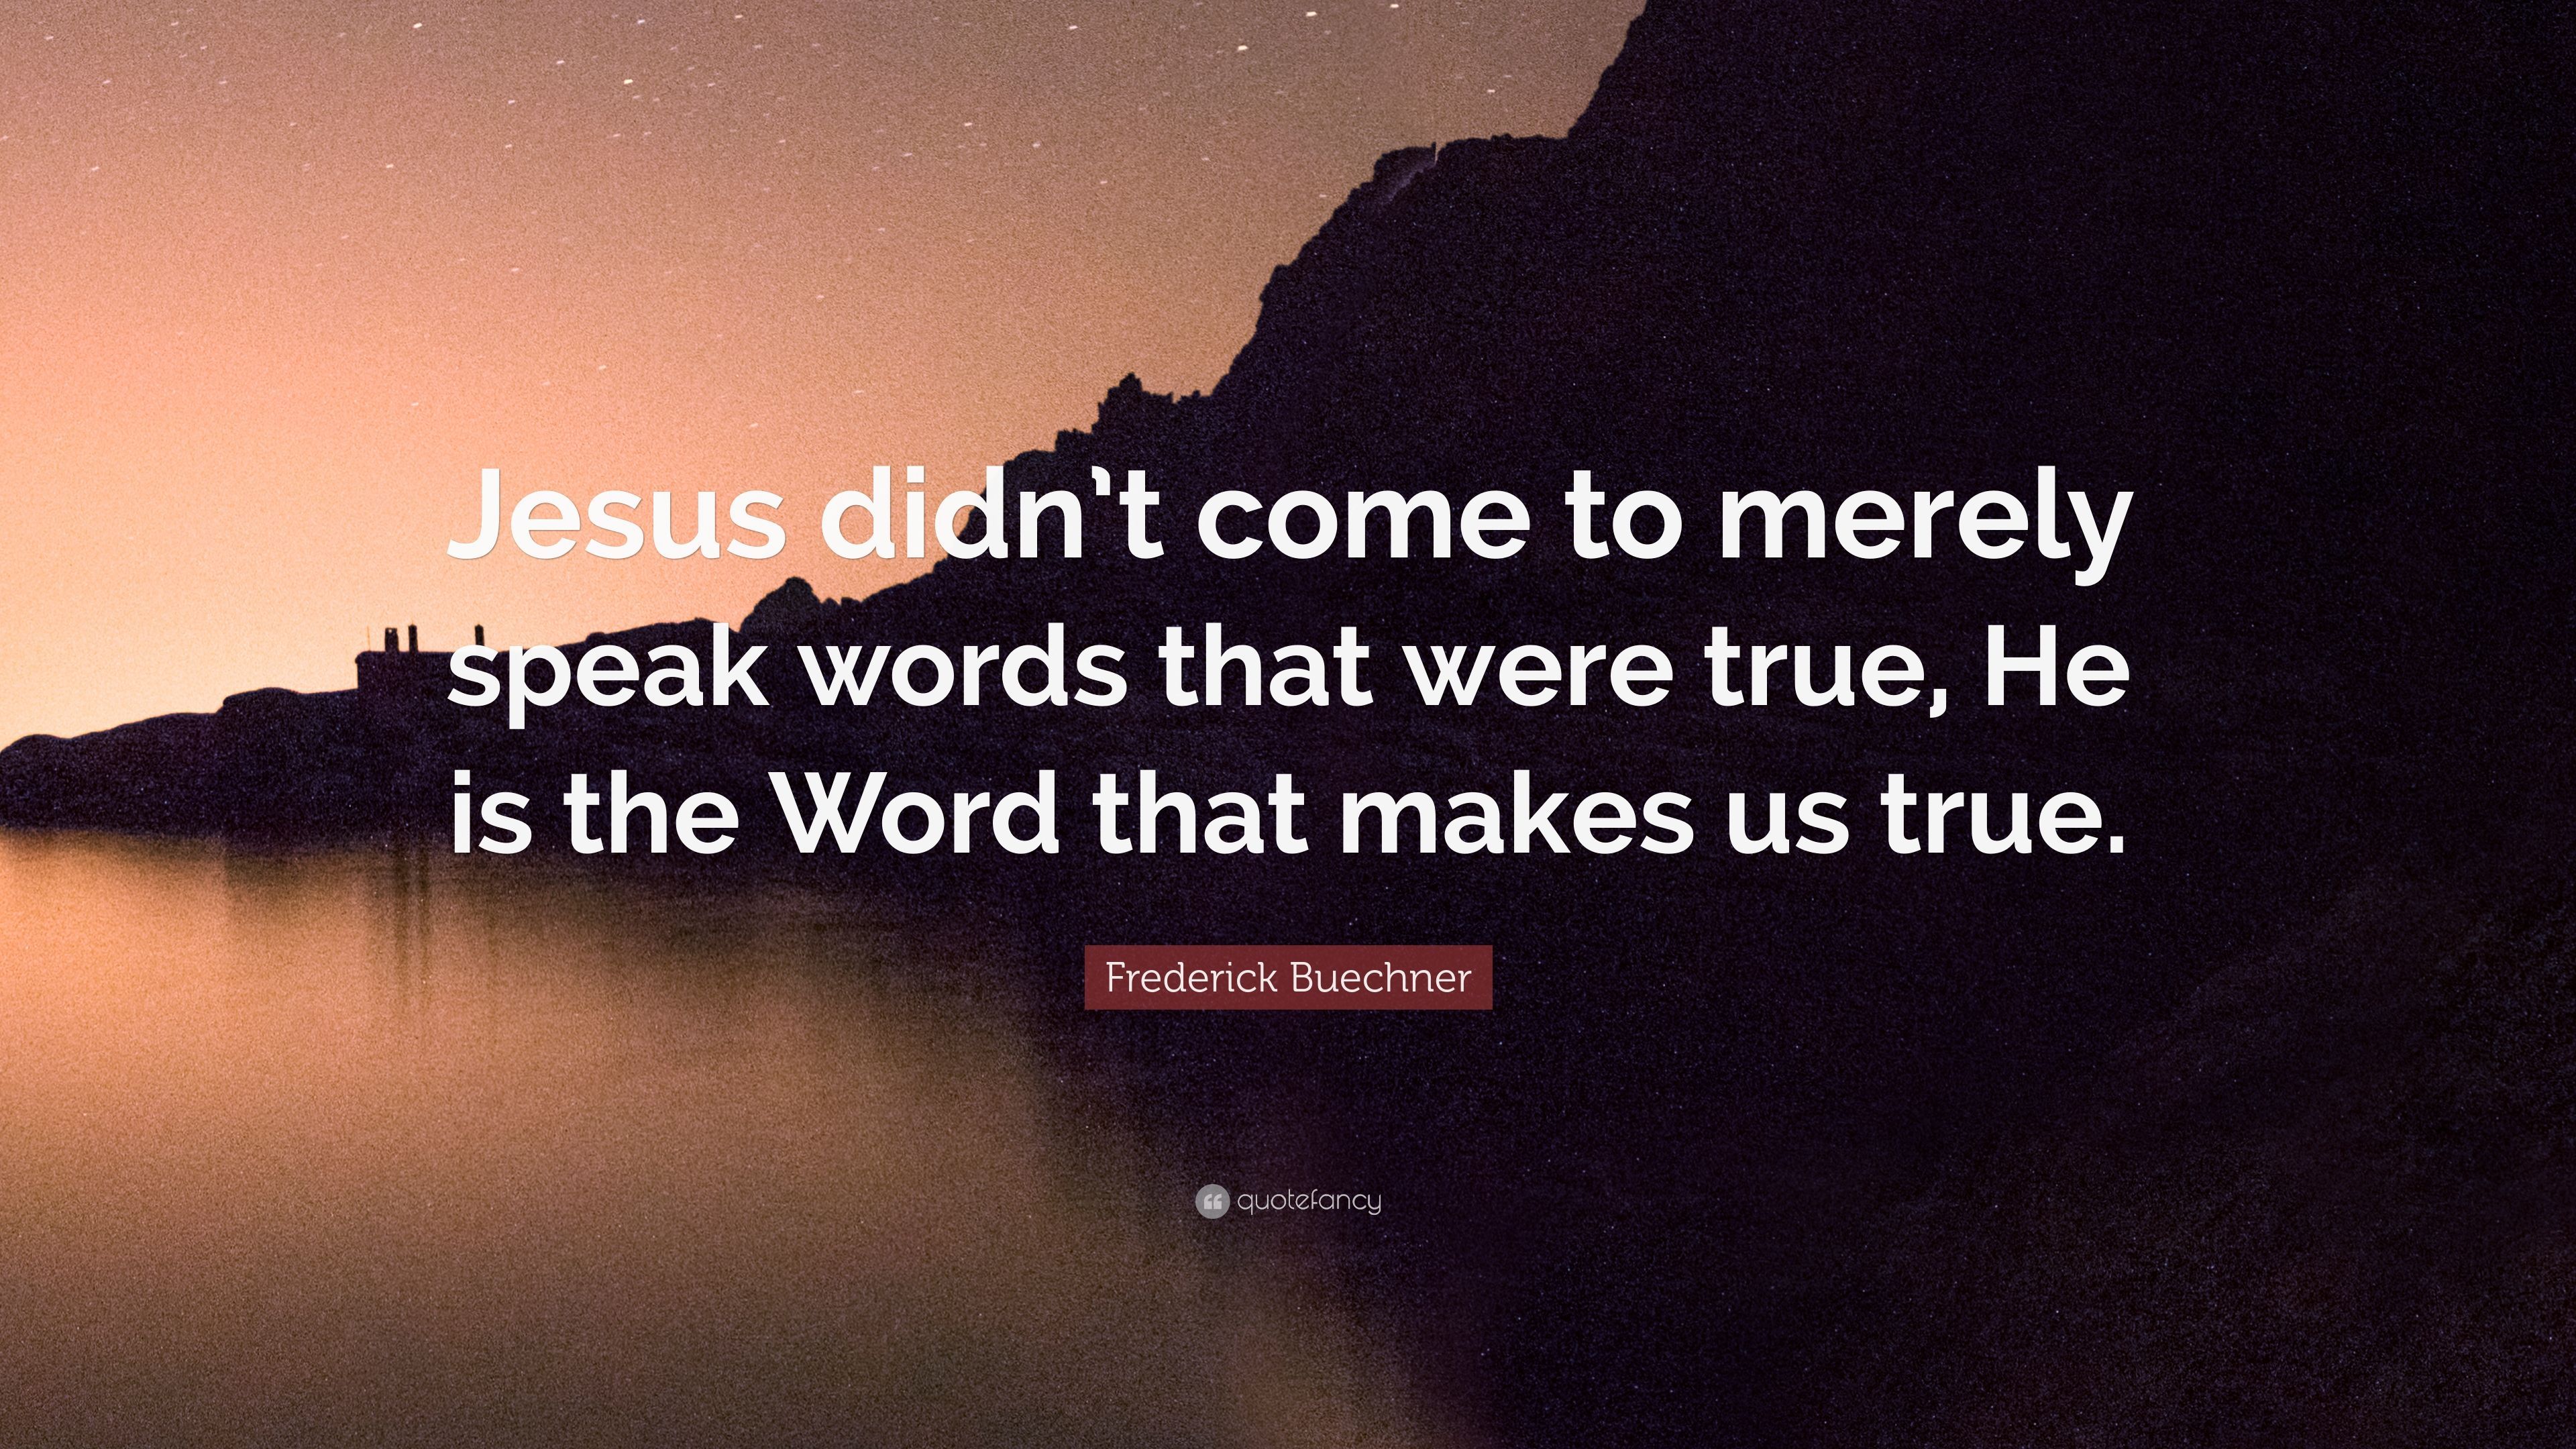 Frederick Buechner Quote: “Jesus didn't come to merely speak words that were true, He is the Word that makes us true.” (7 wallpaper)